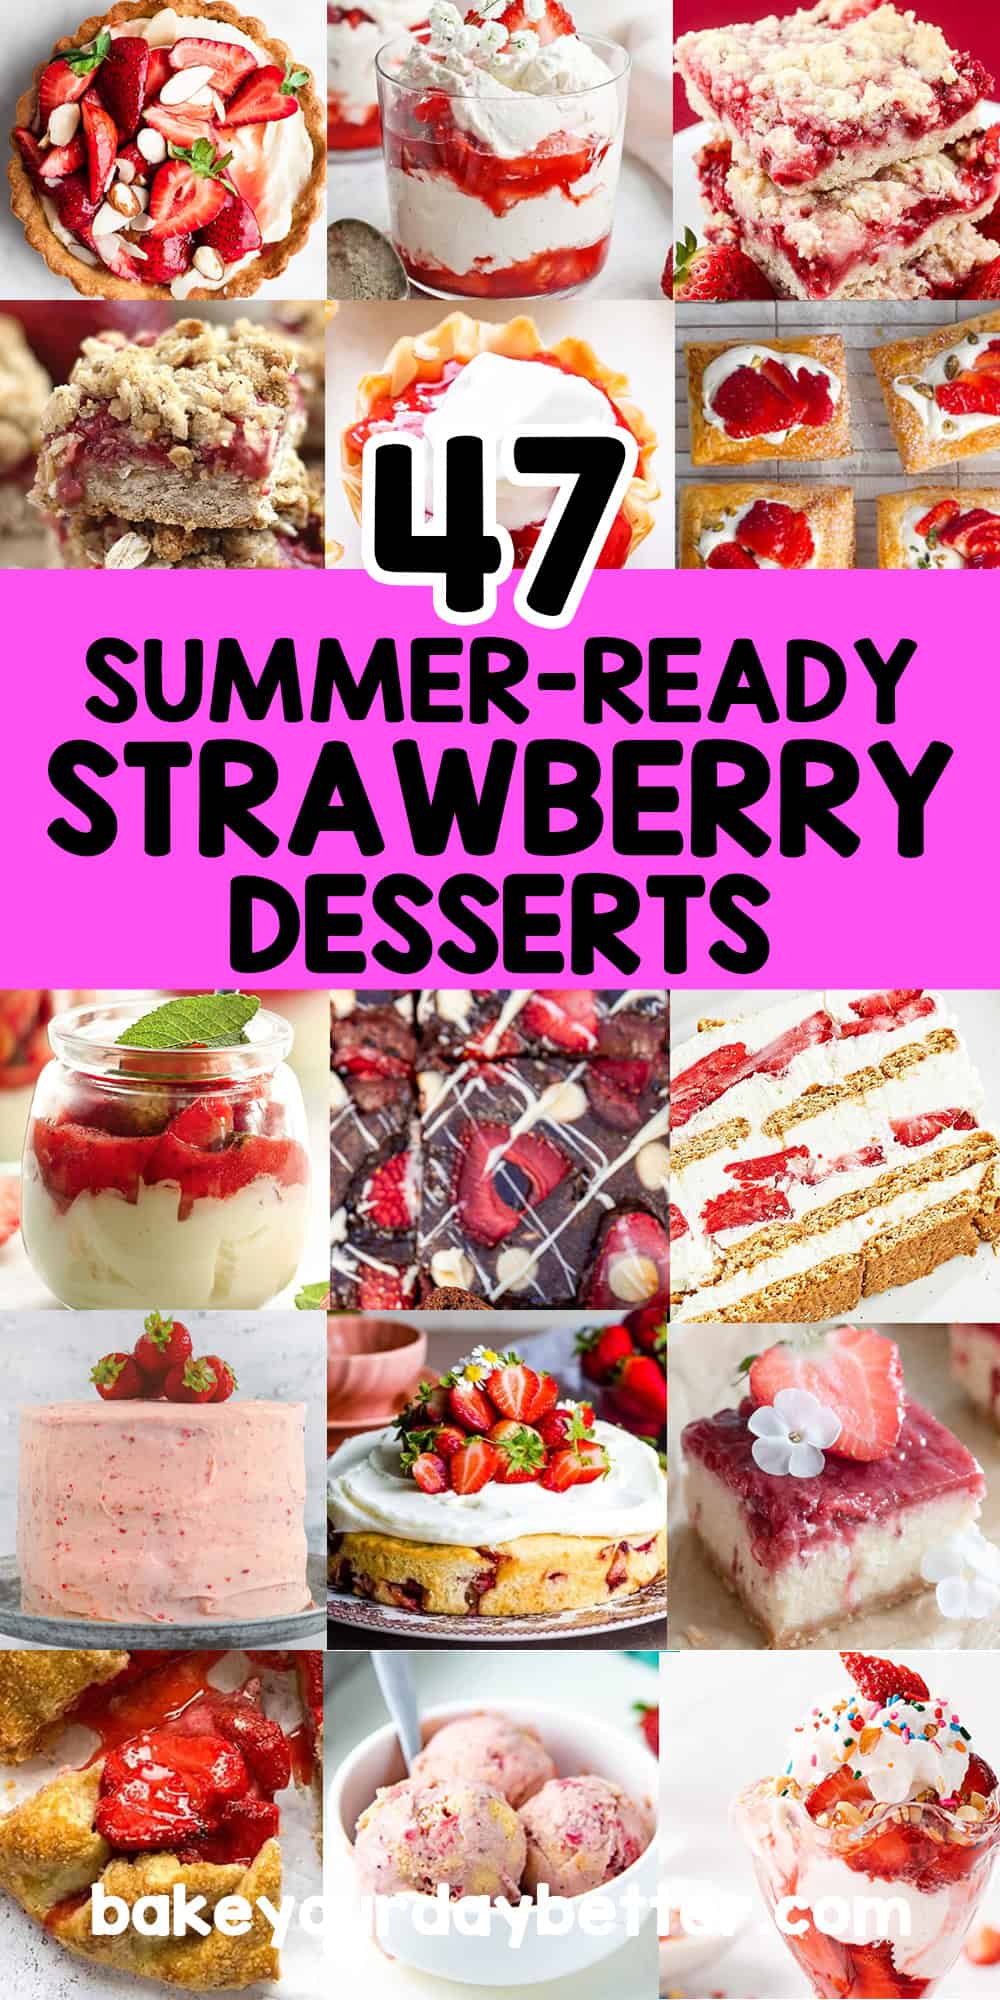 pictures of strawberry desserts with text overlay that says: 47 summer-ready strawberry desserts